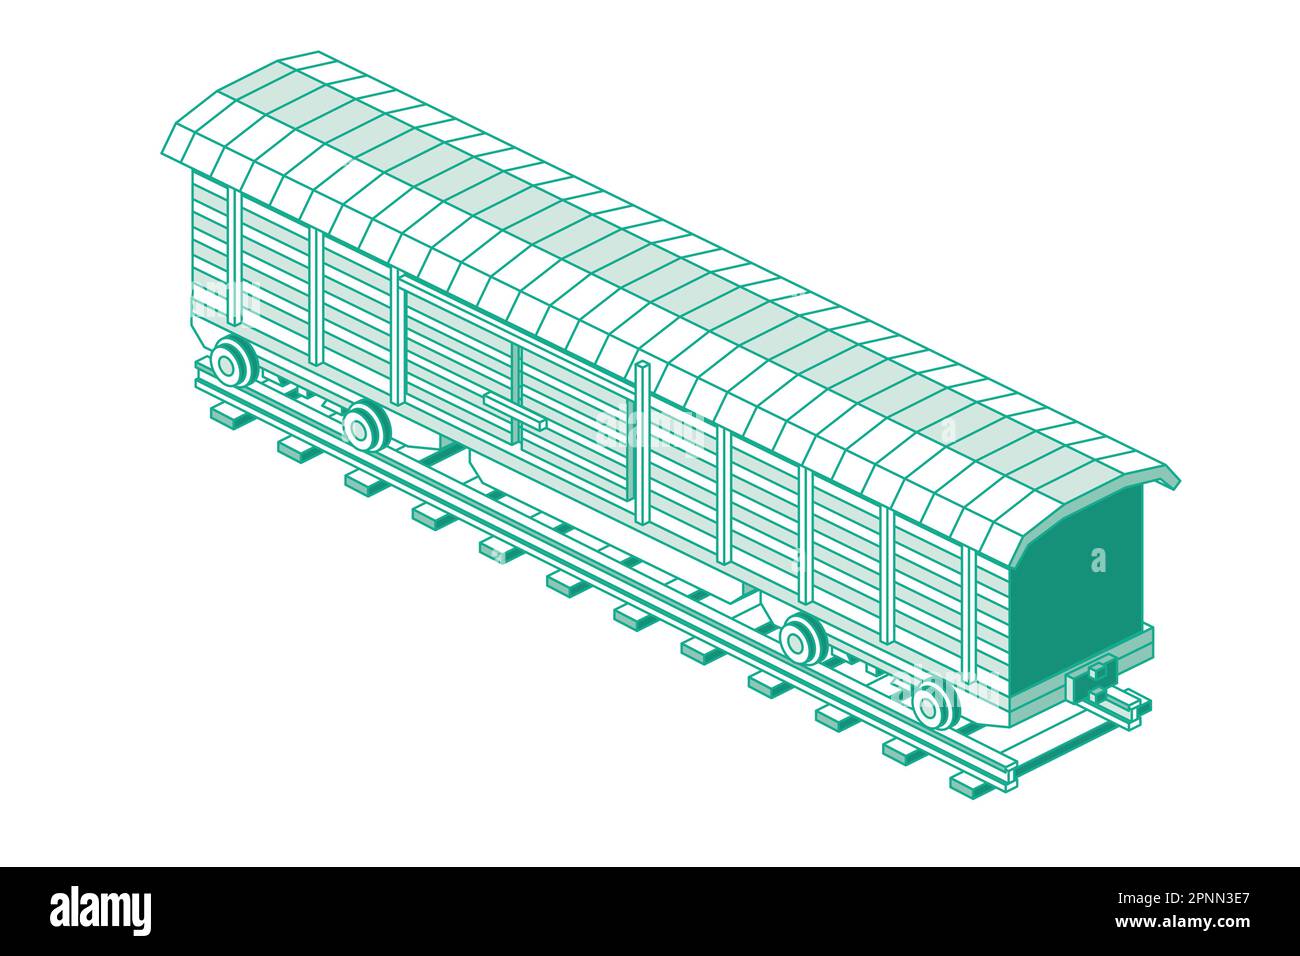 Isometric Freight Railroad Car Isolated on White Background. Vector Illustration. Freight Boxcar Wagon. Part of Cargo Train. Outline Transportation. Stock Vector